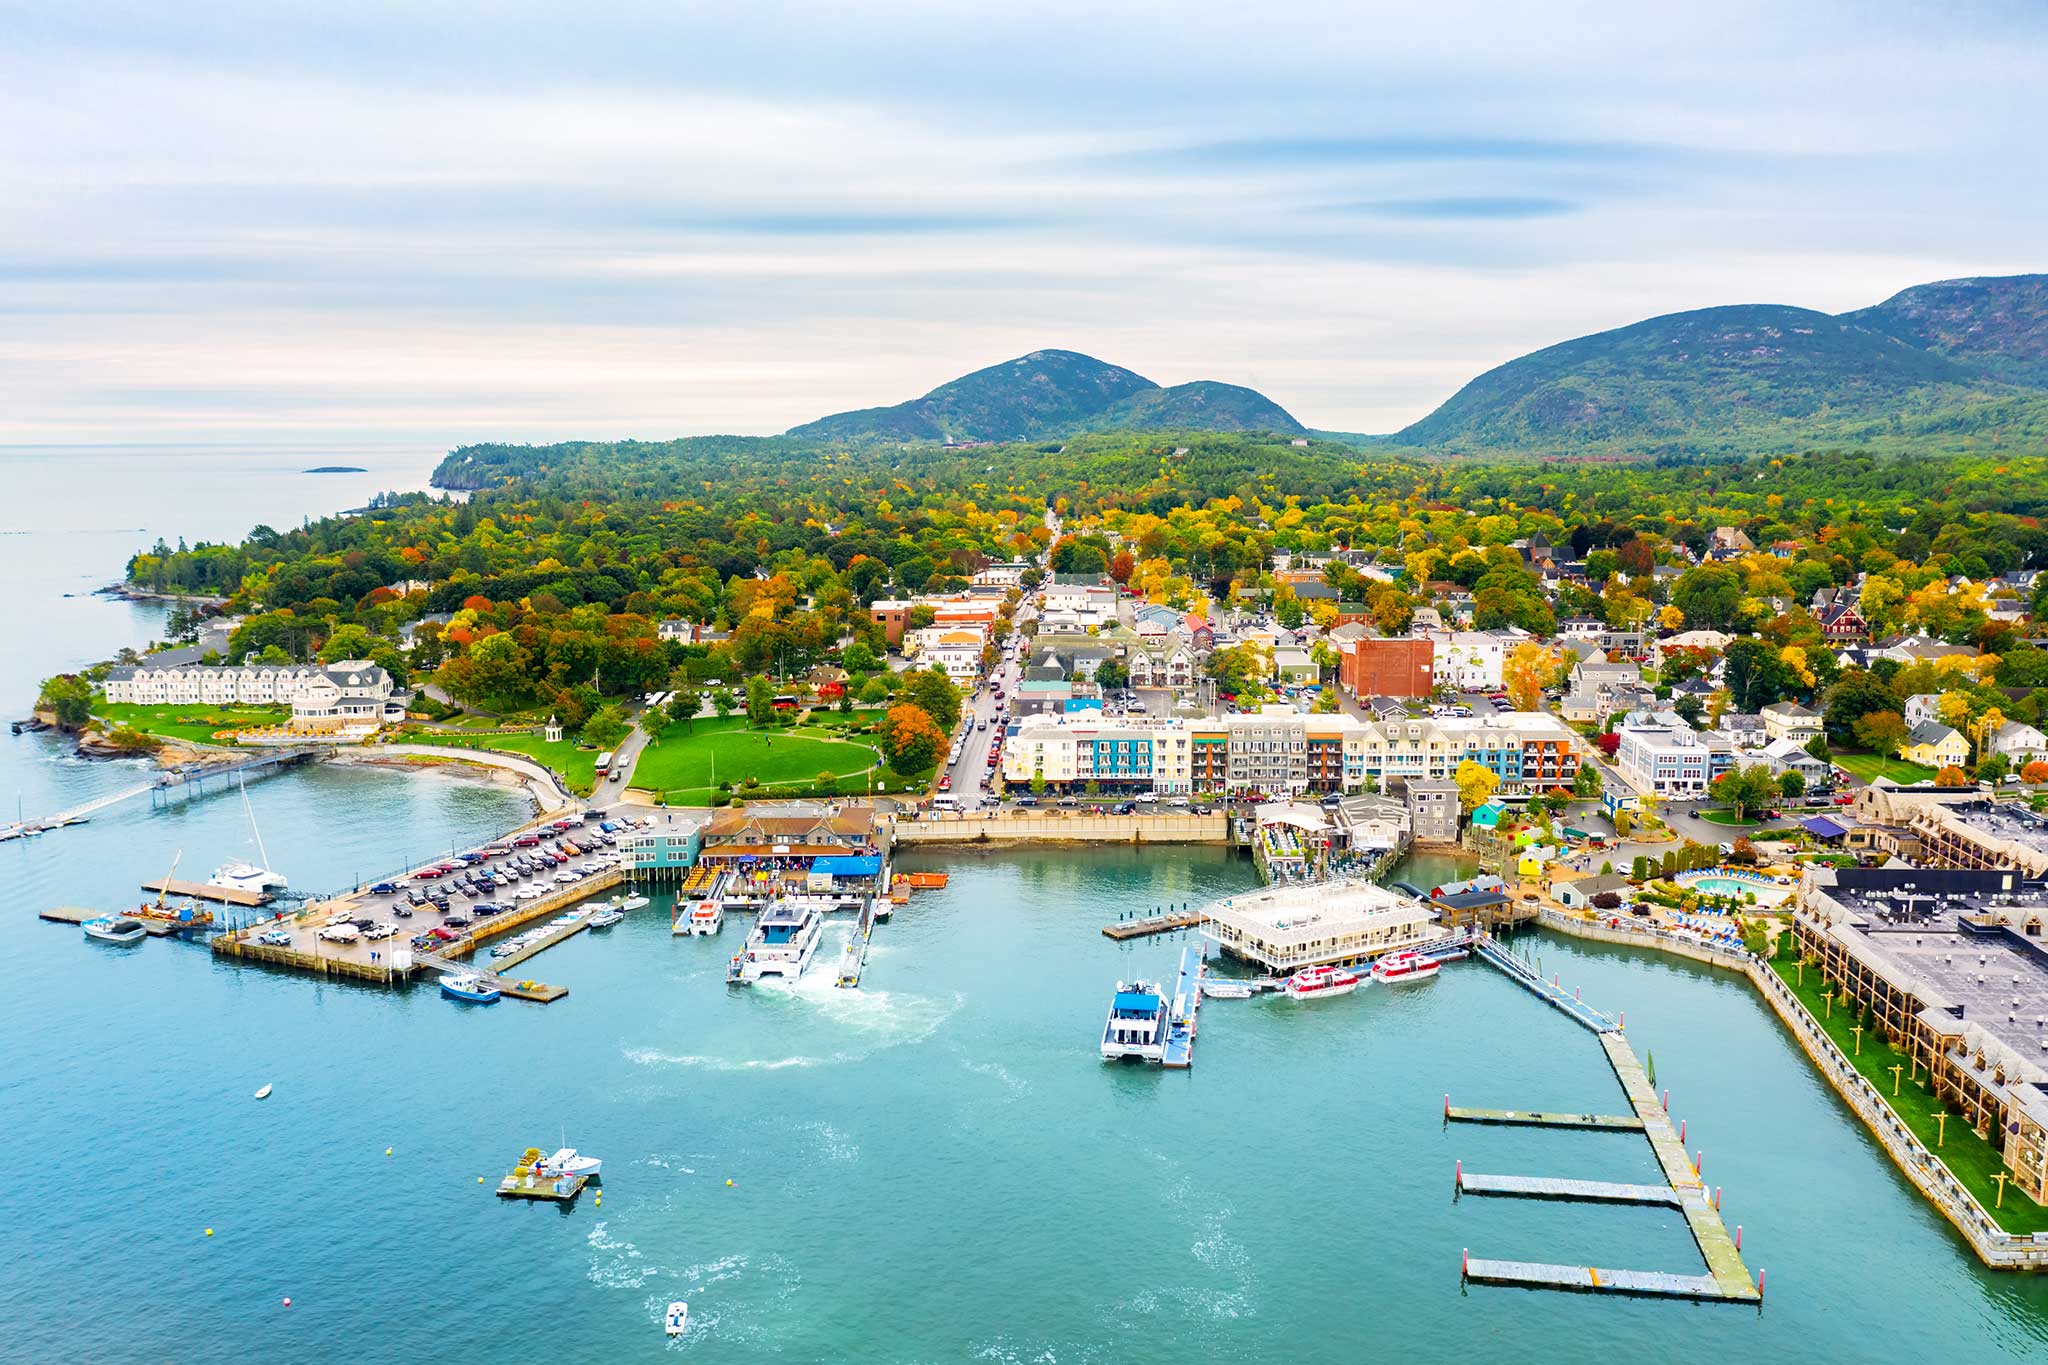 Panoramic view above a quaint seaside town with a marina full of boats, set against a backdrop of lush green hills and a tapestry of fall foliage under an overcast sky.